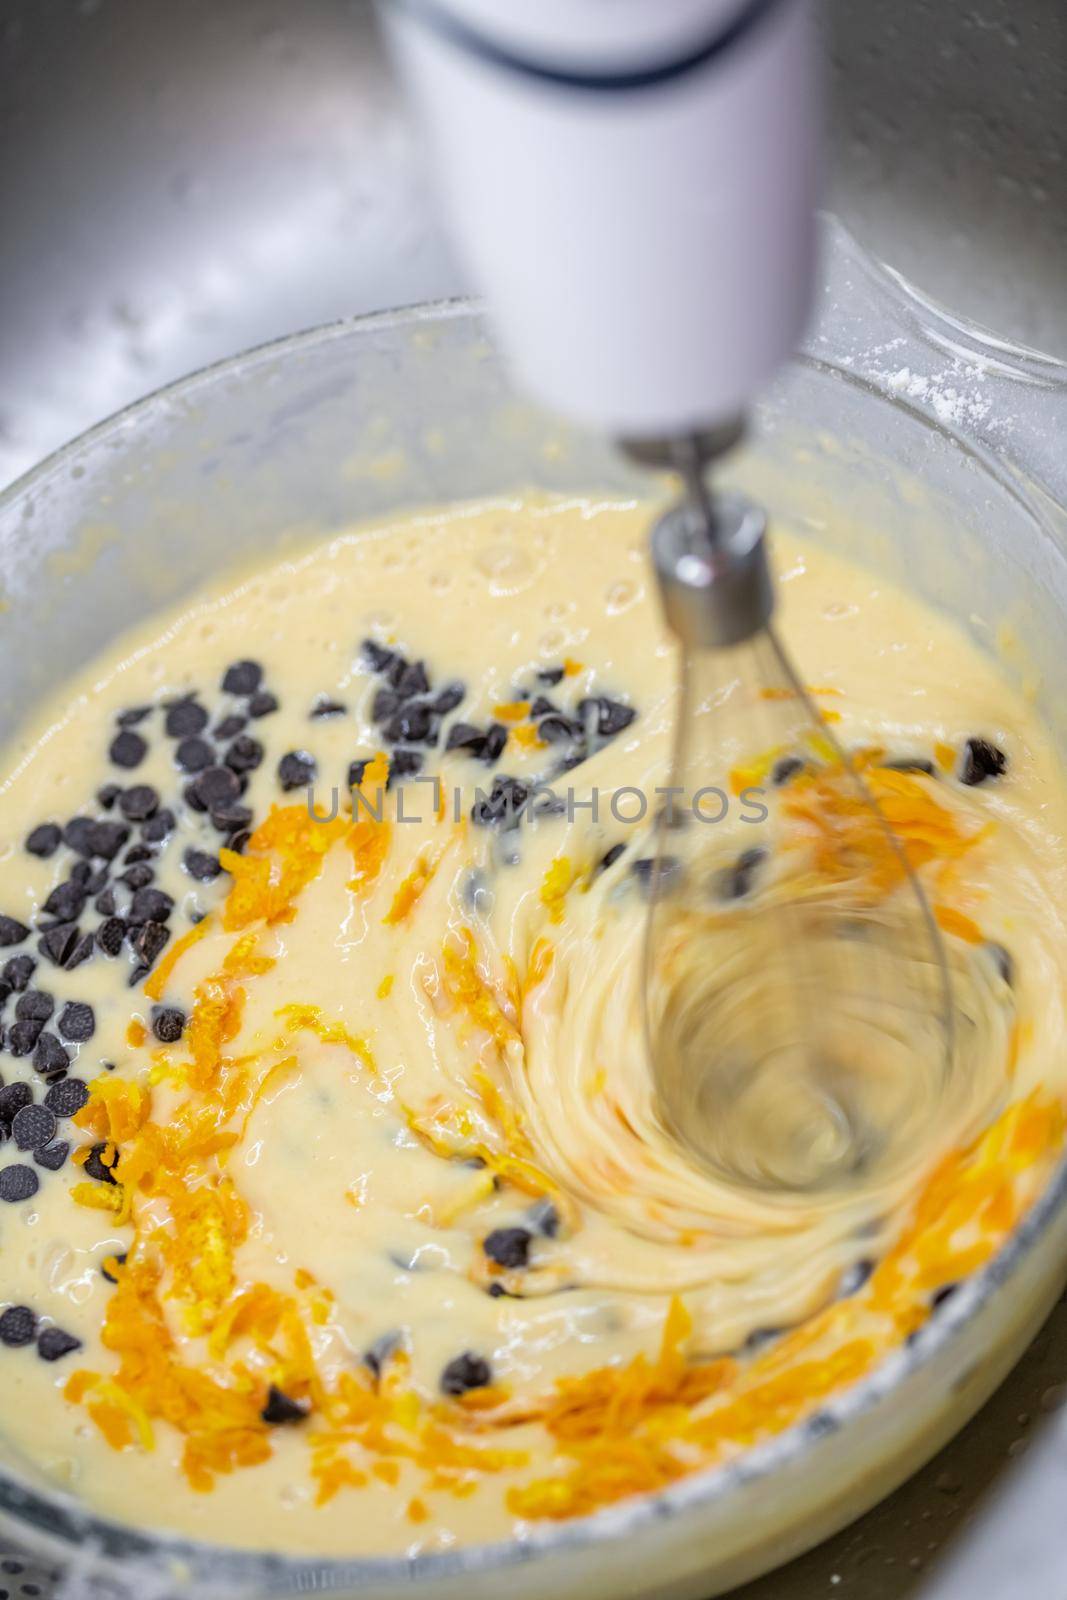 mixing homemade cake by Sonat